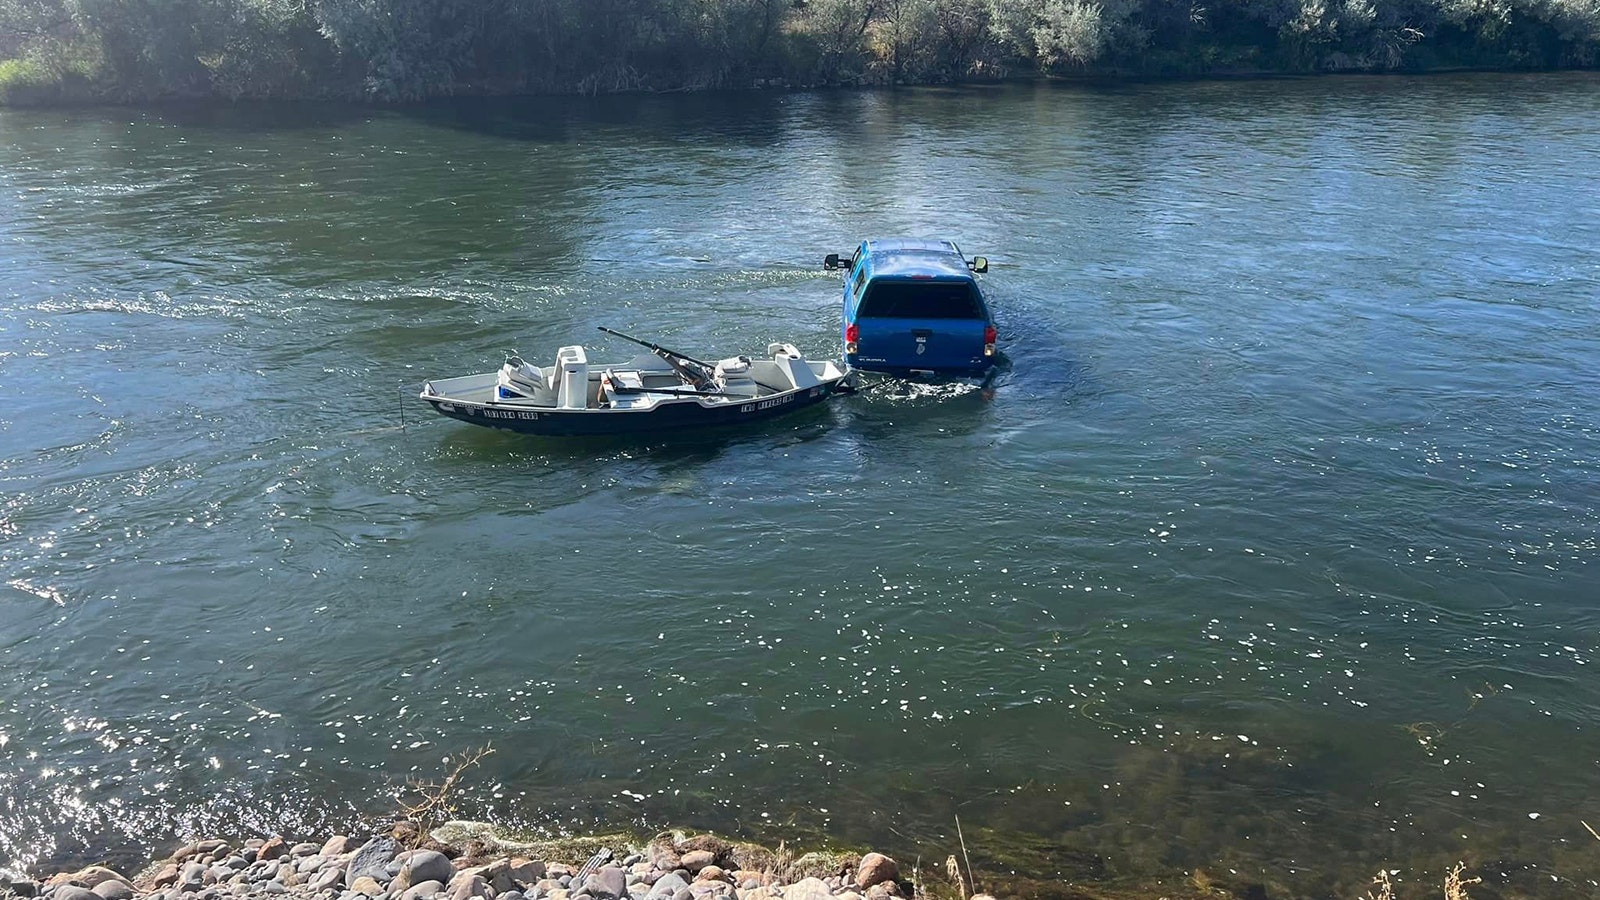 Truck and boat in river 2 10 5 23